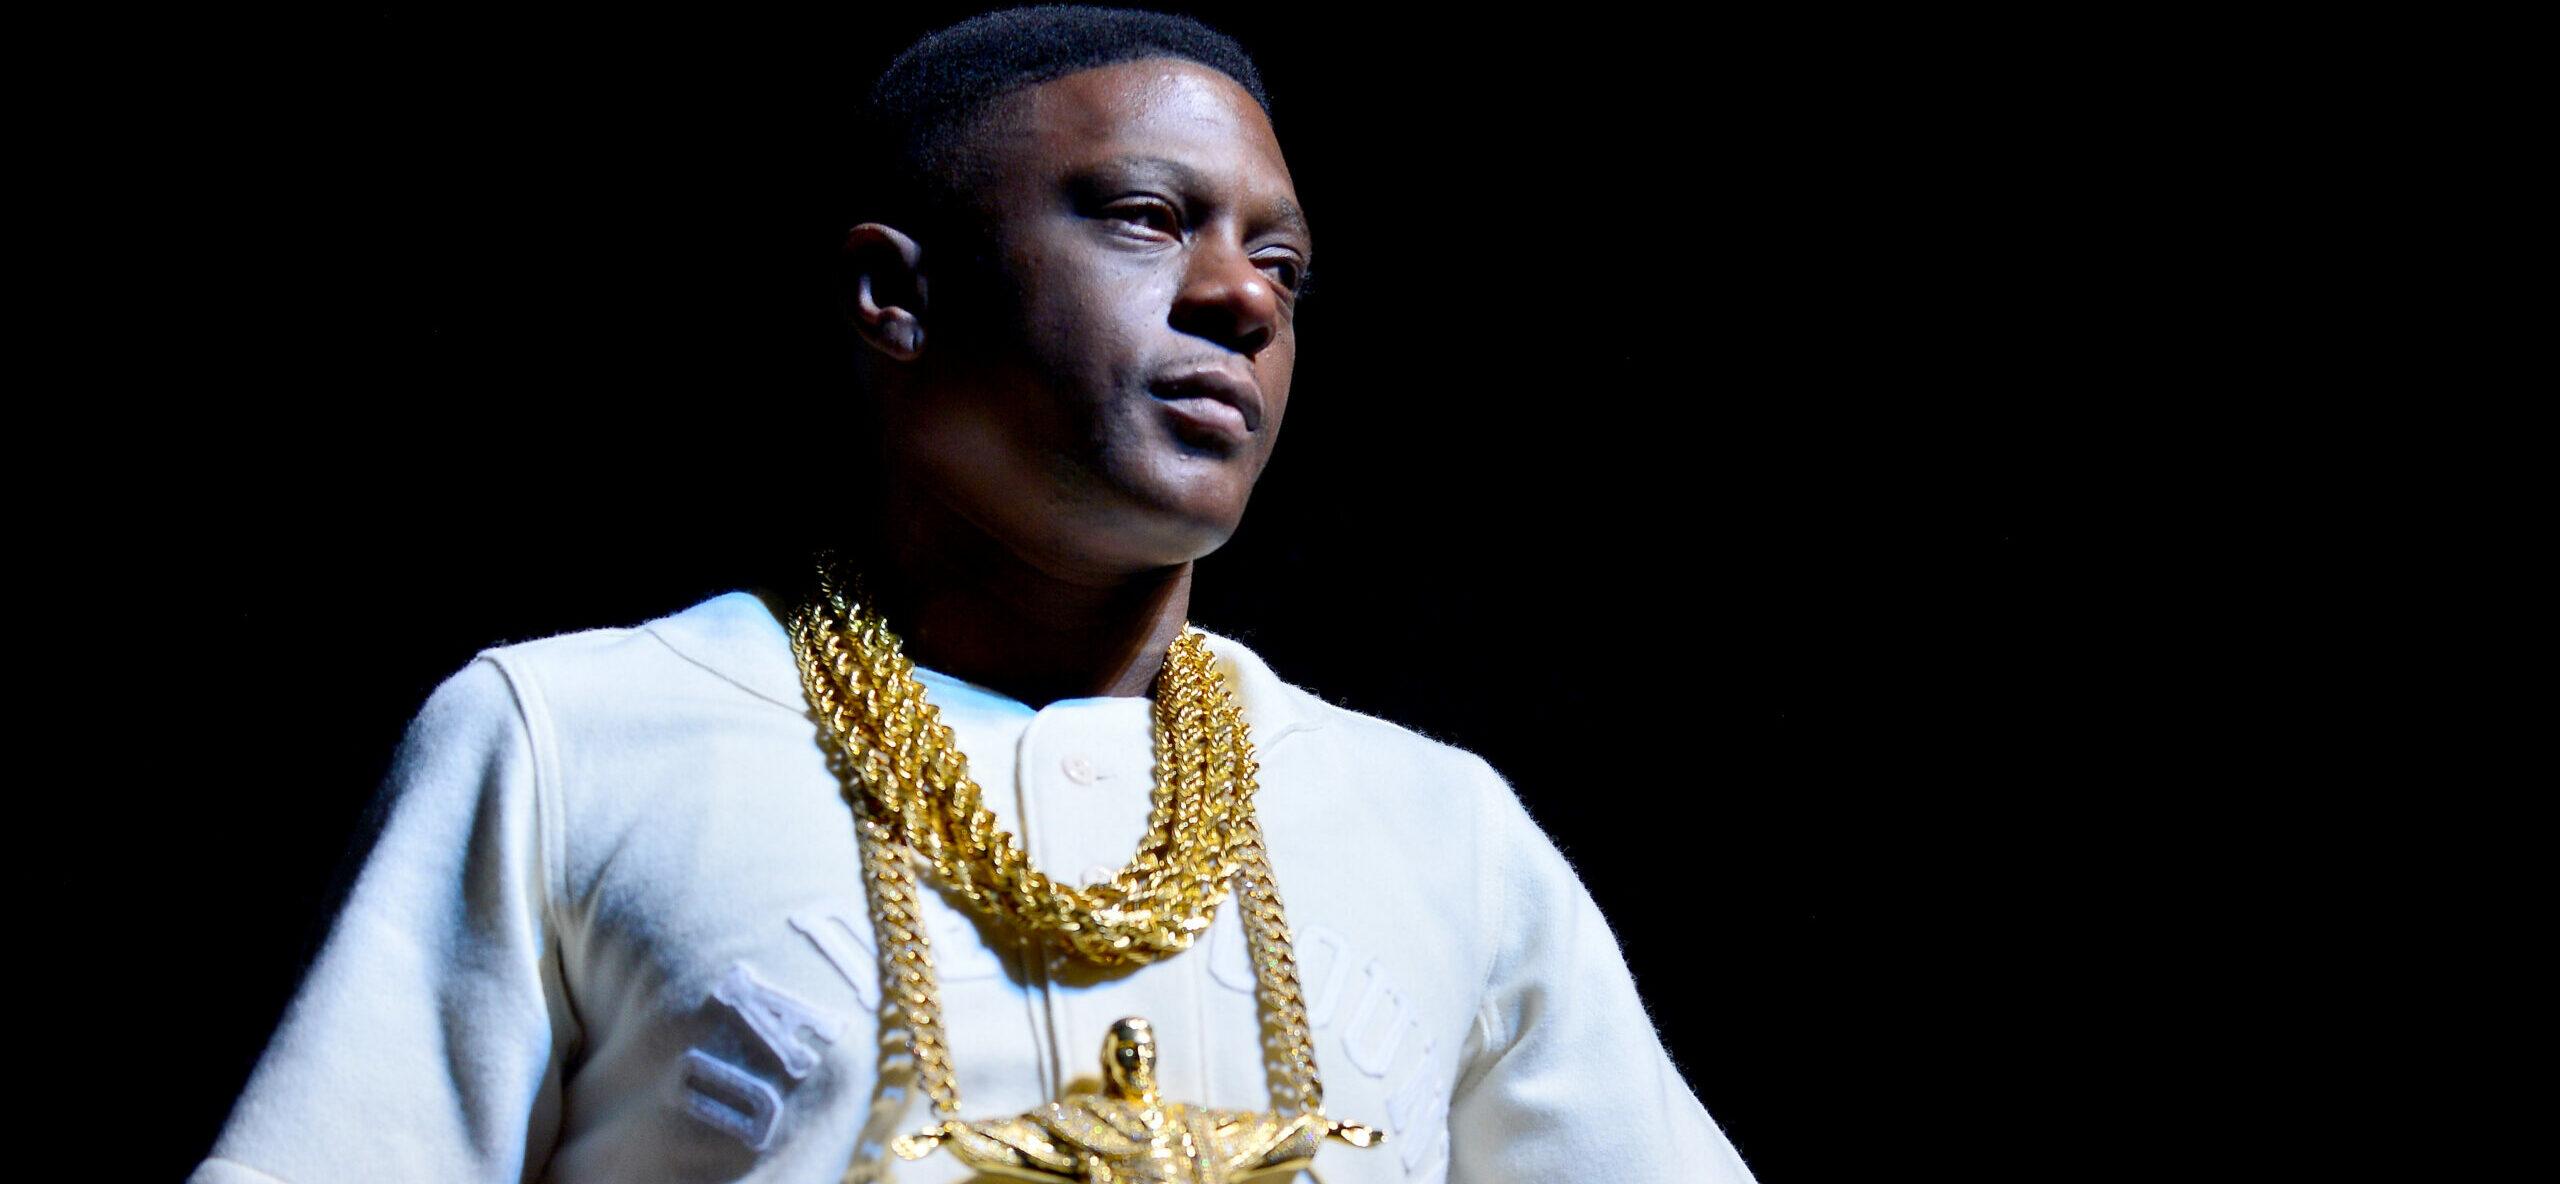 Lil’ Boosie Involved In Brawl On Stage, Allegedly Damaged Production Equipment